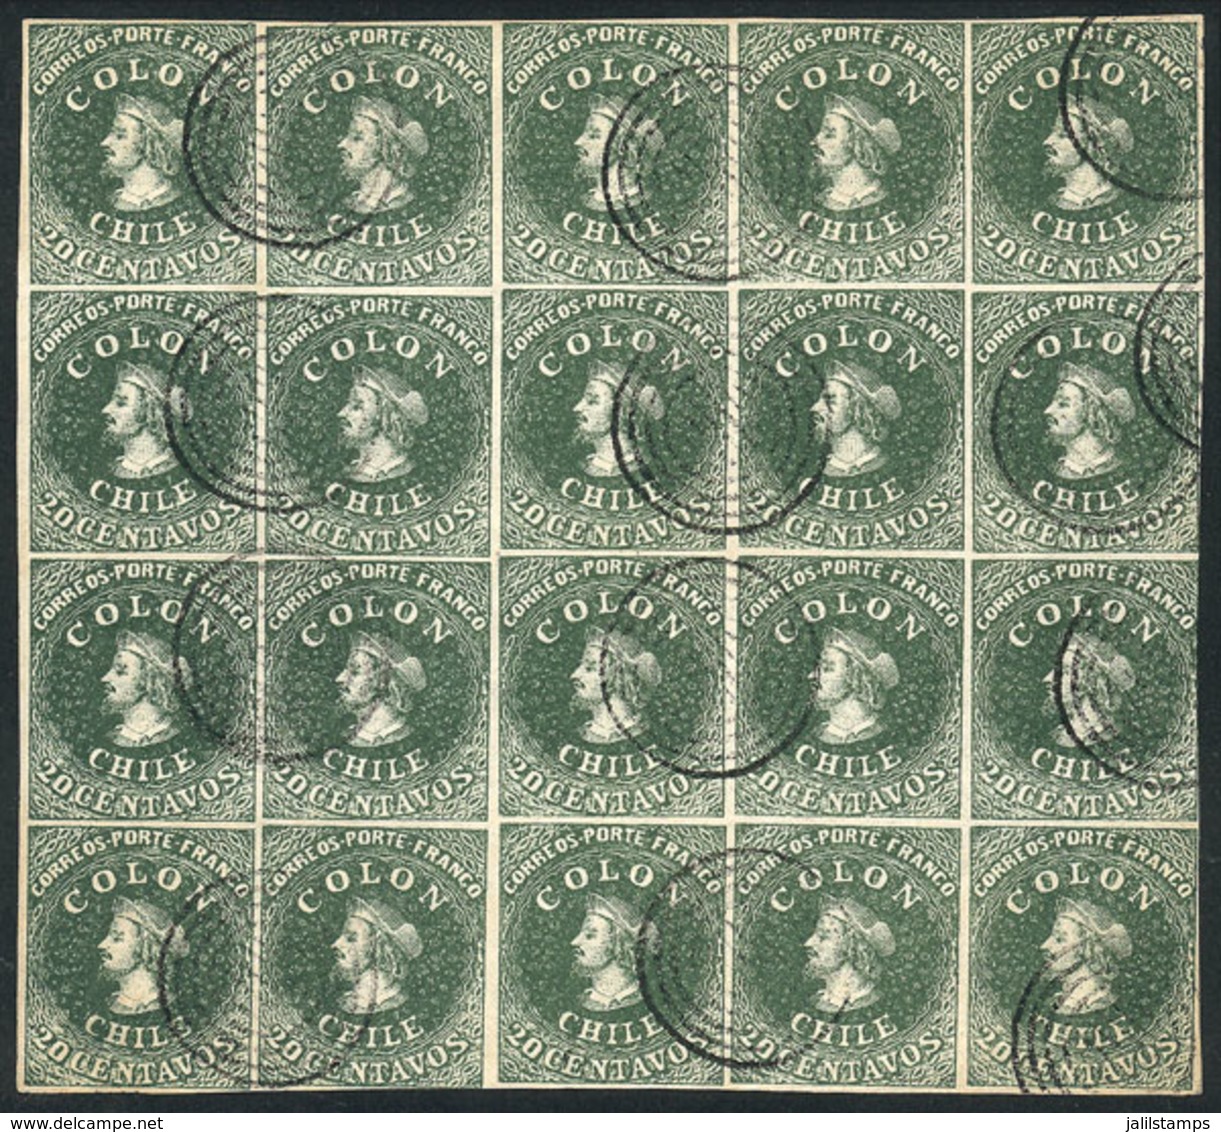 CHILE: GJ.13, 1862 20c. Green, Unwatermarked REPRINT, Beautiful Block Of 20 Stamps, Excellent Quality! - Chili